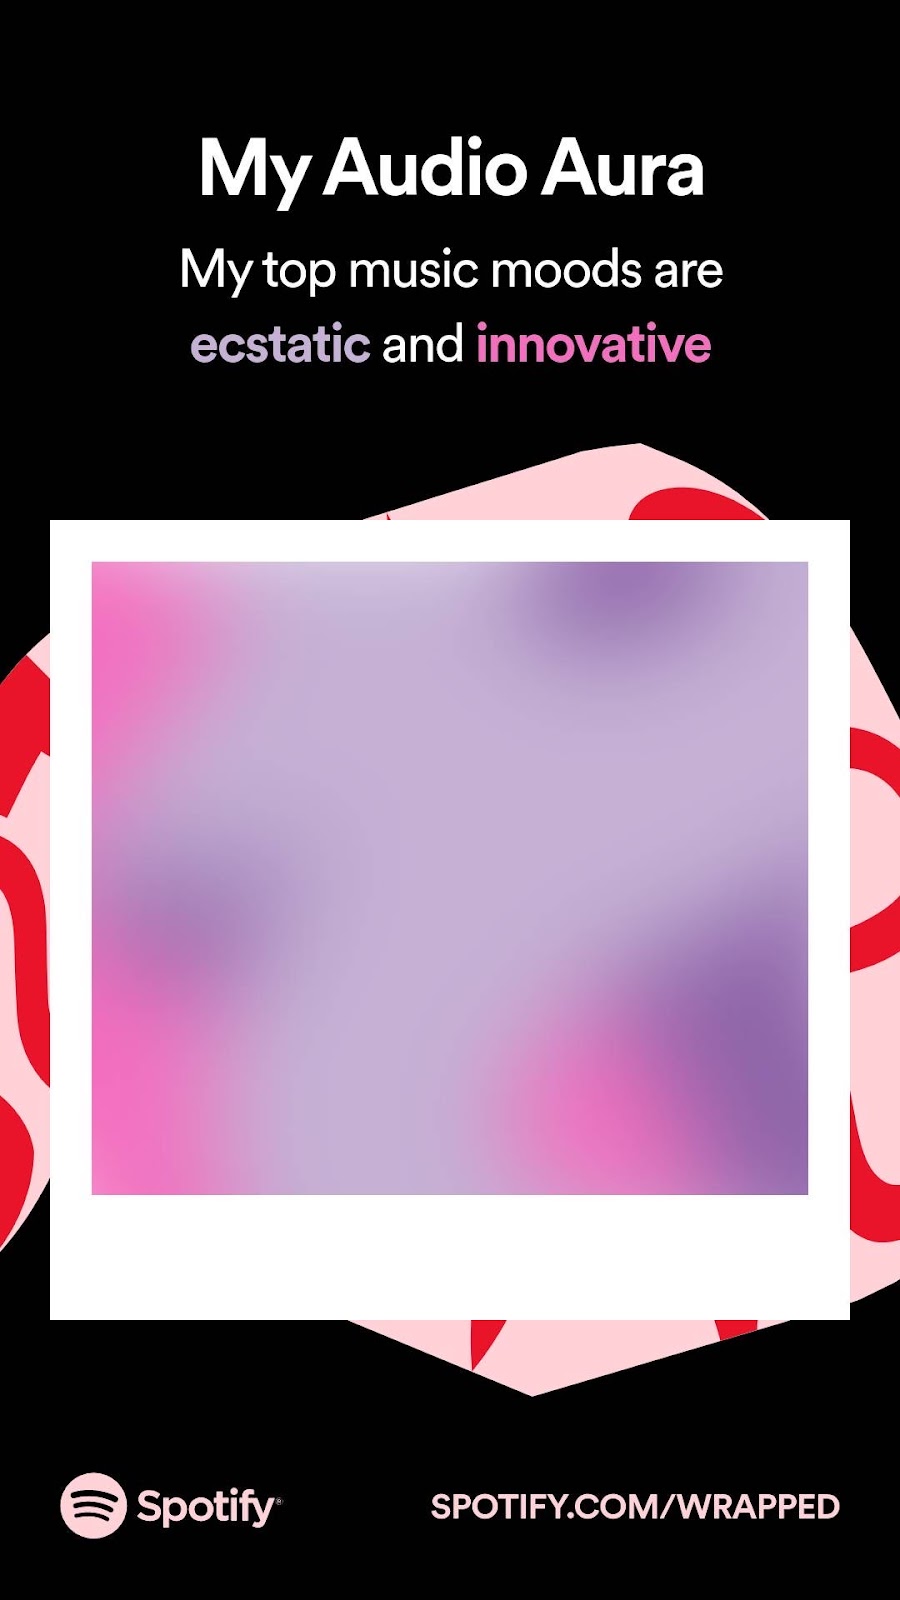 Screenshot from Spotify wrapped, showing that My audio aura has top music moods of ecstatic (highlighted in purple) and innovative (highlighted in pink). A square mush of purple and pink gradient accompanies the text.